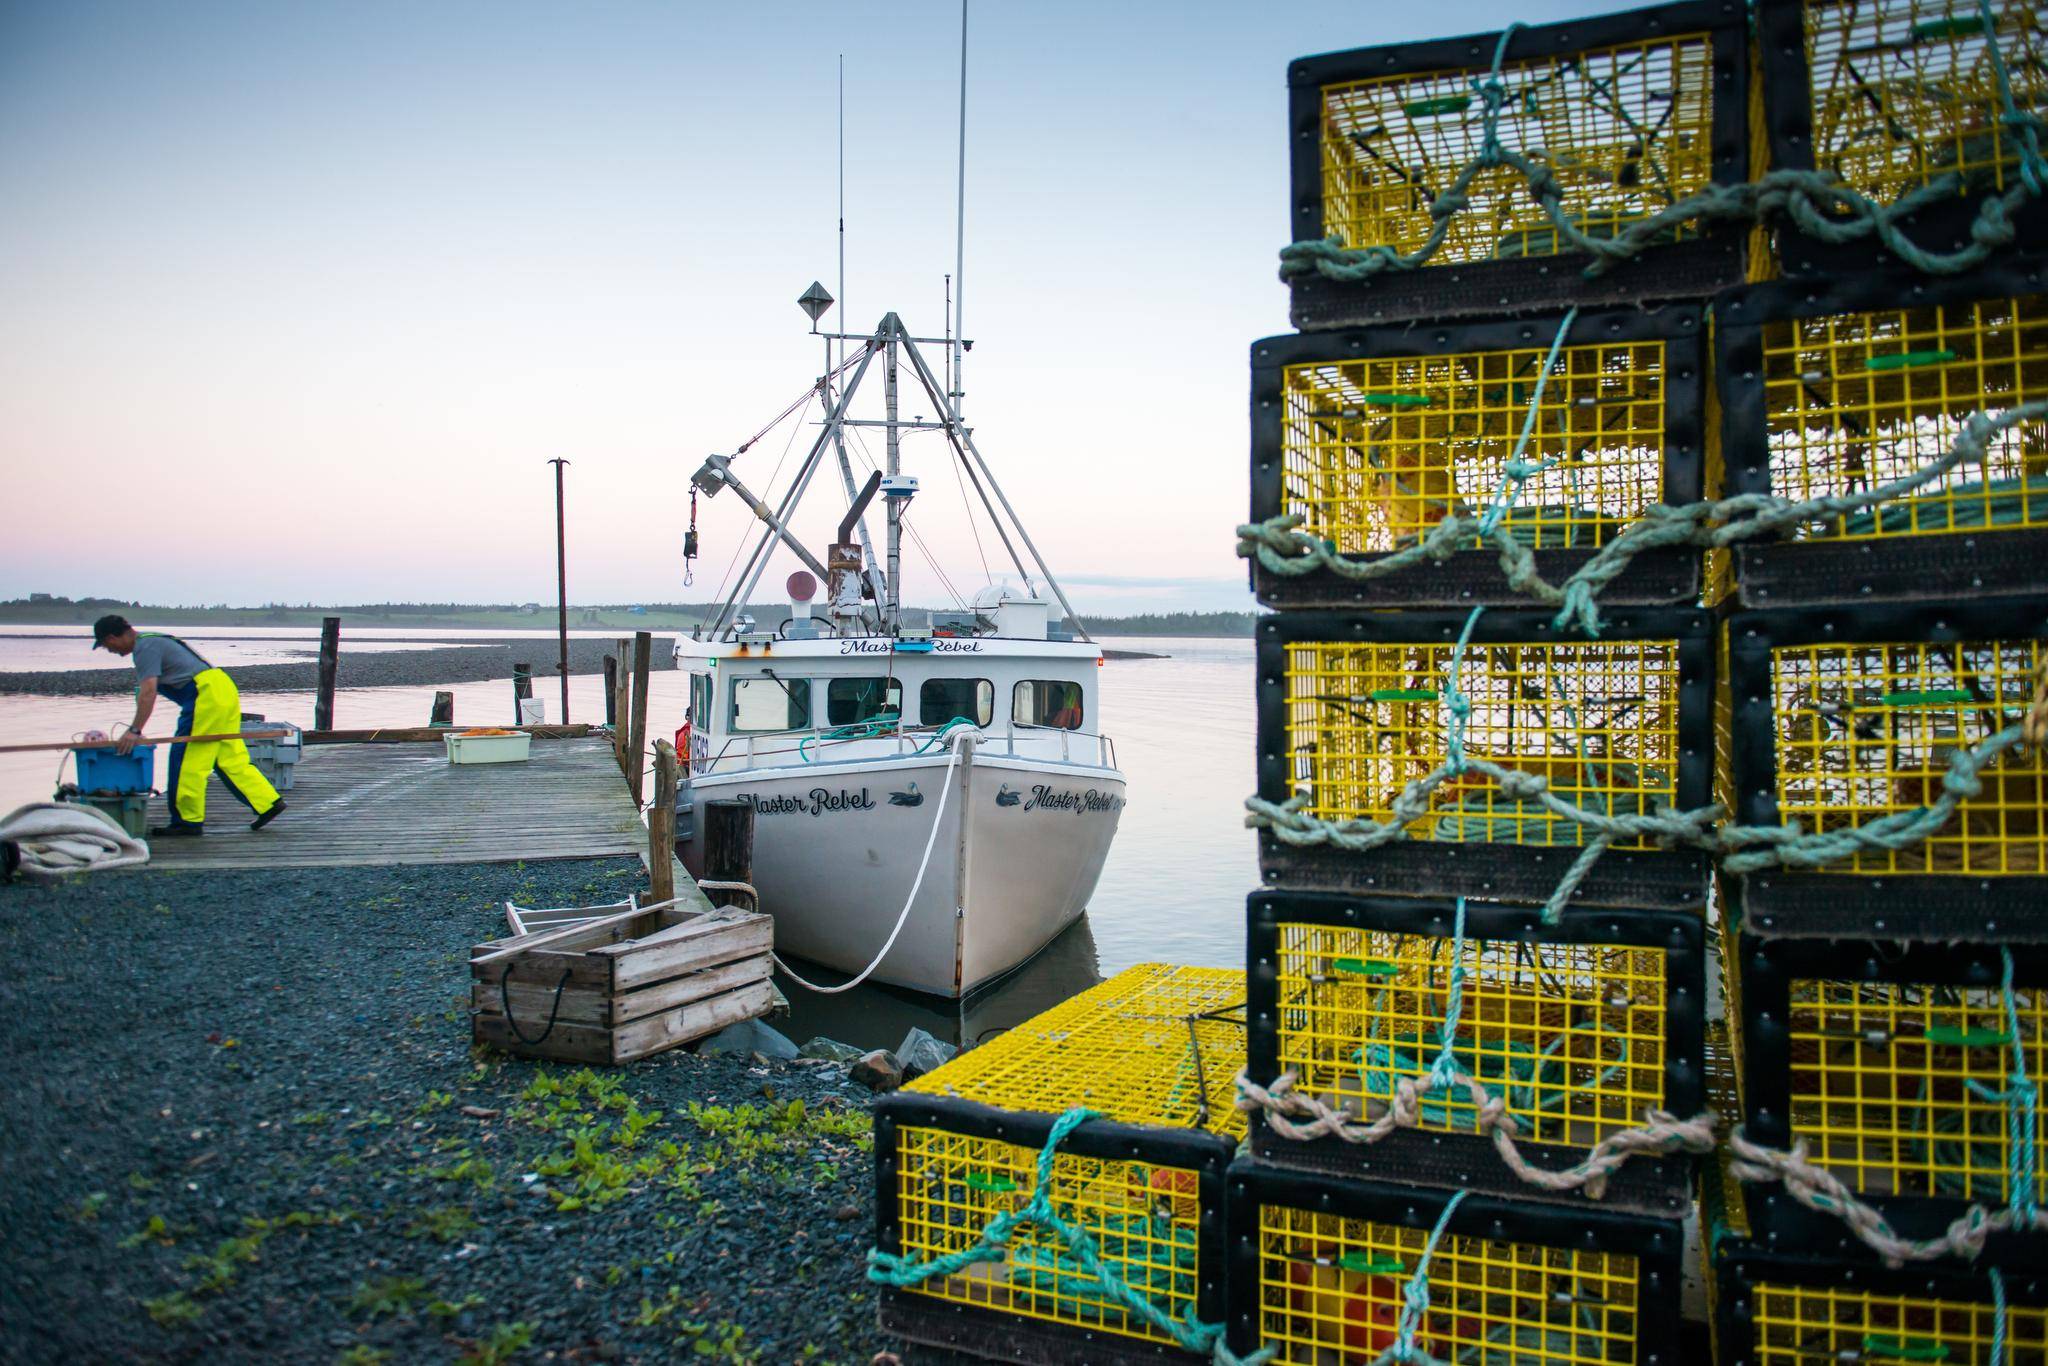 I want to be a commercial fisherman. What will my salary be? - The